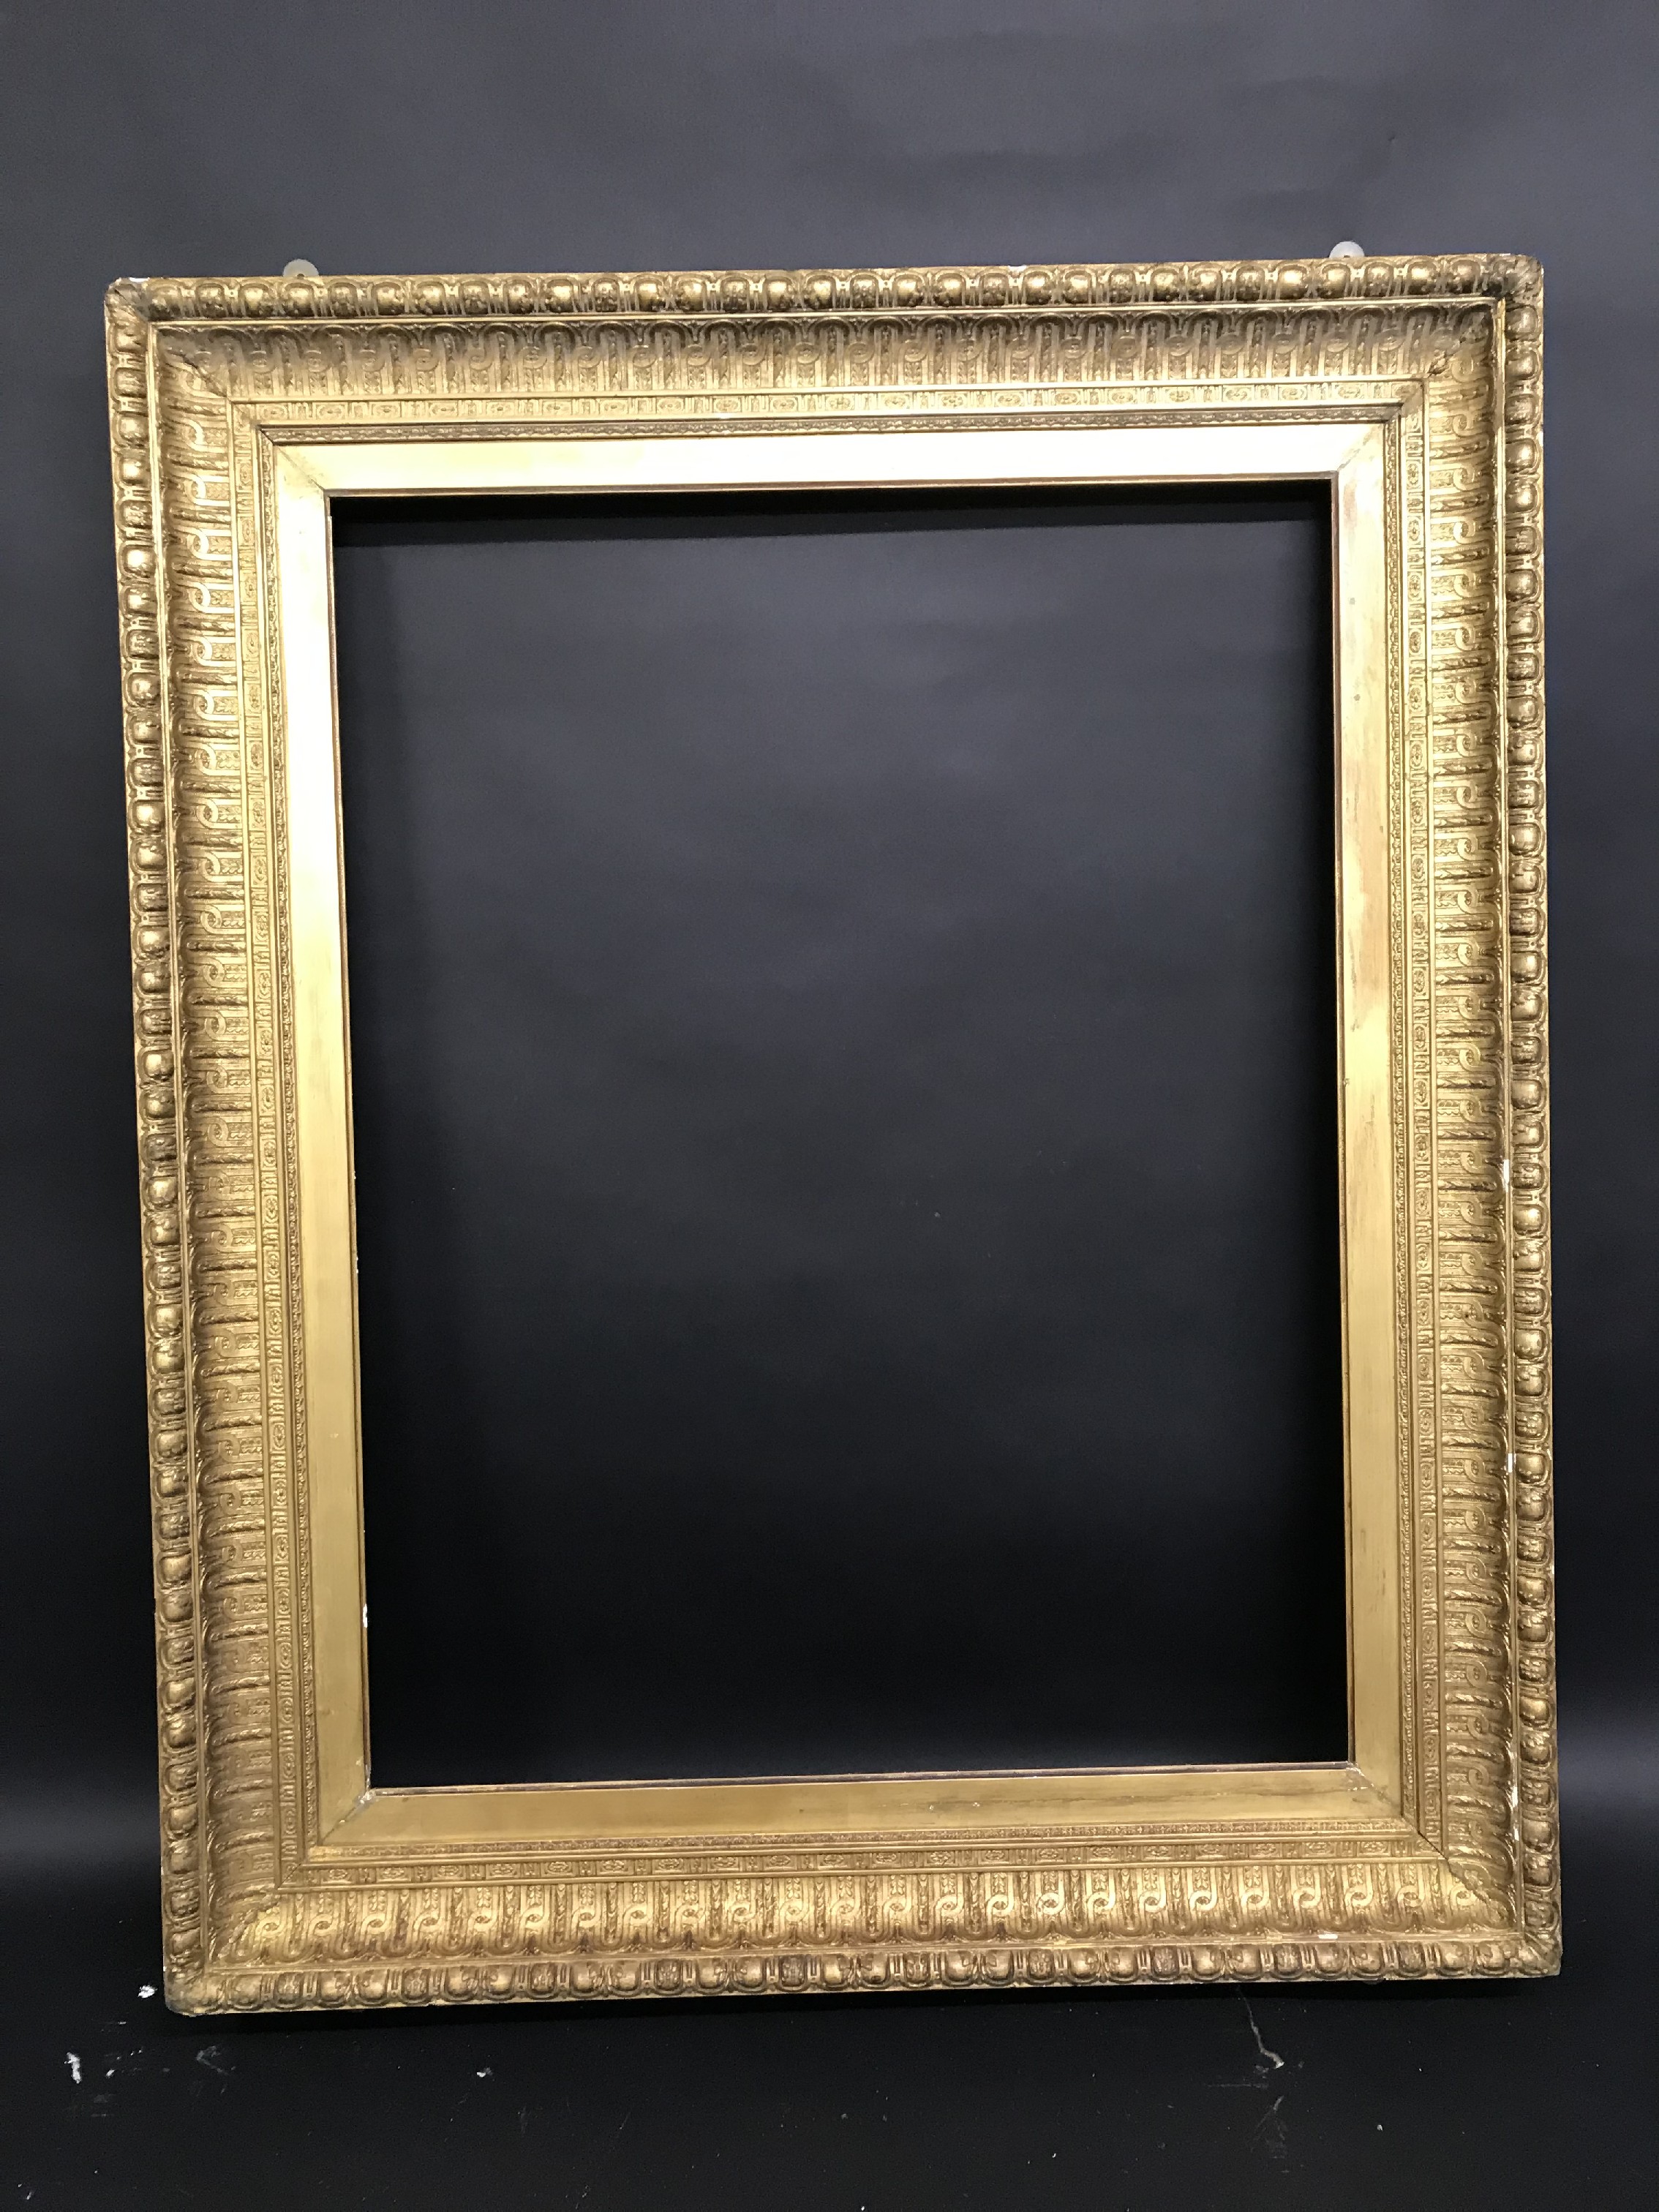 19th Century English School. A Gilt Composition Frame, 36" x 28" (rebate). - Image 2 of 3